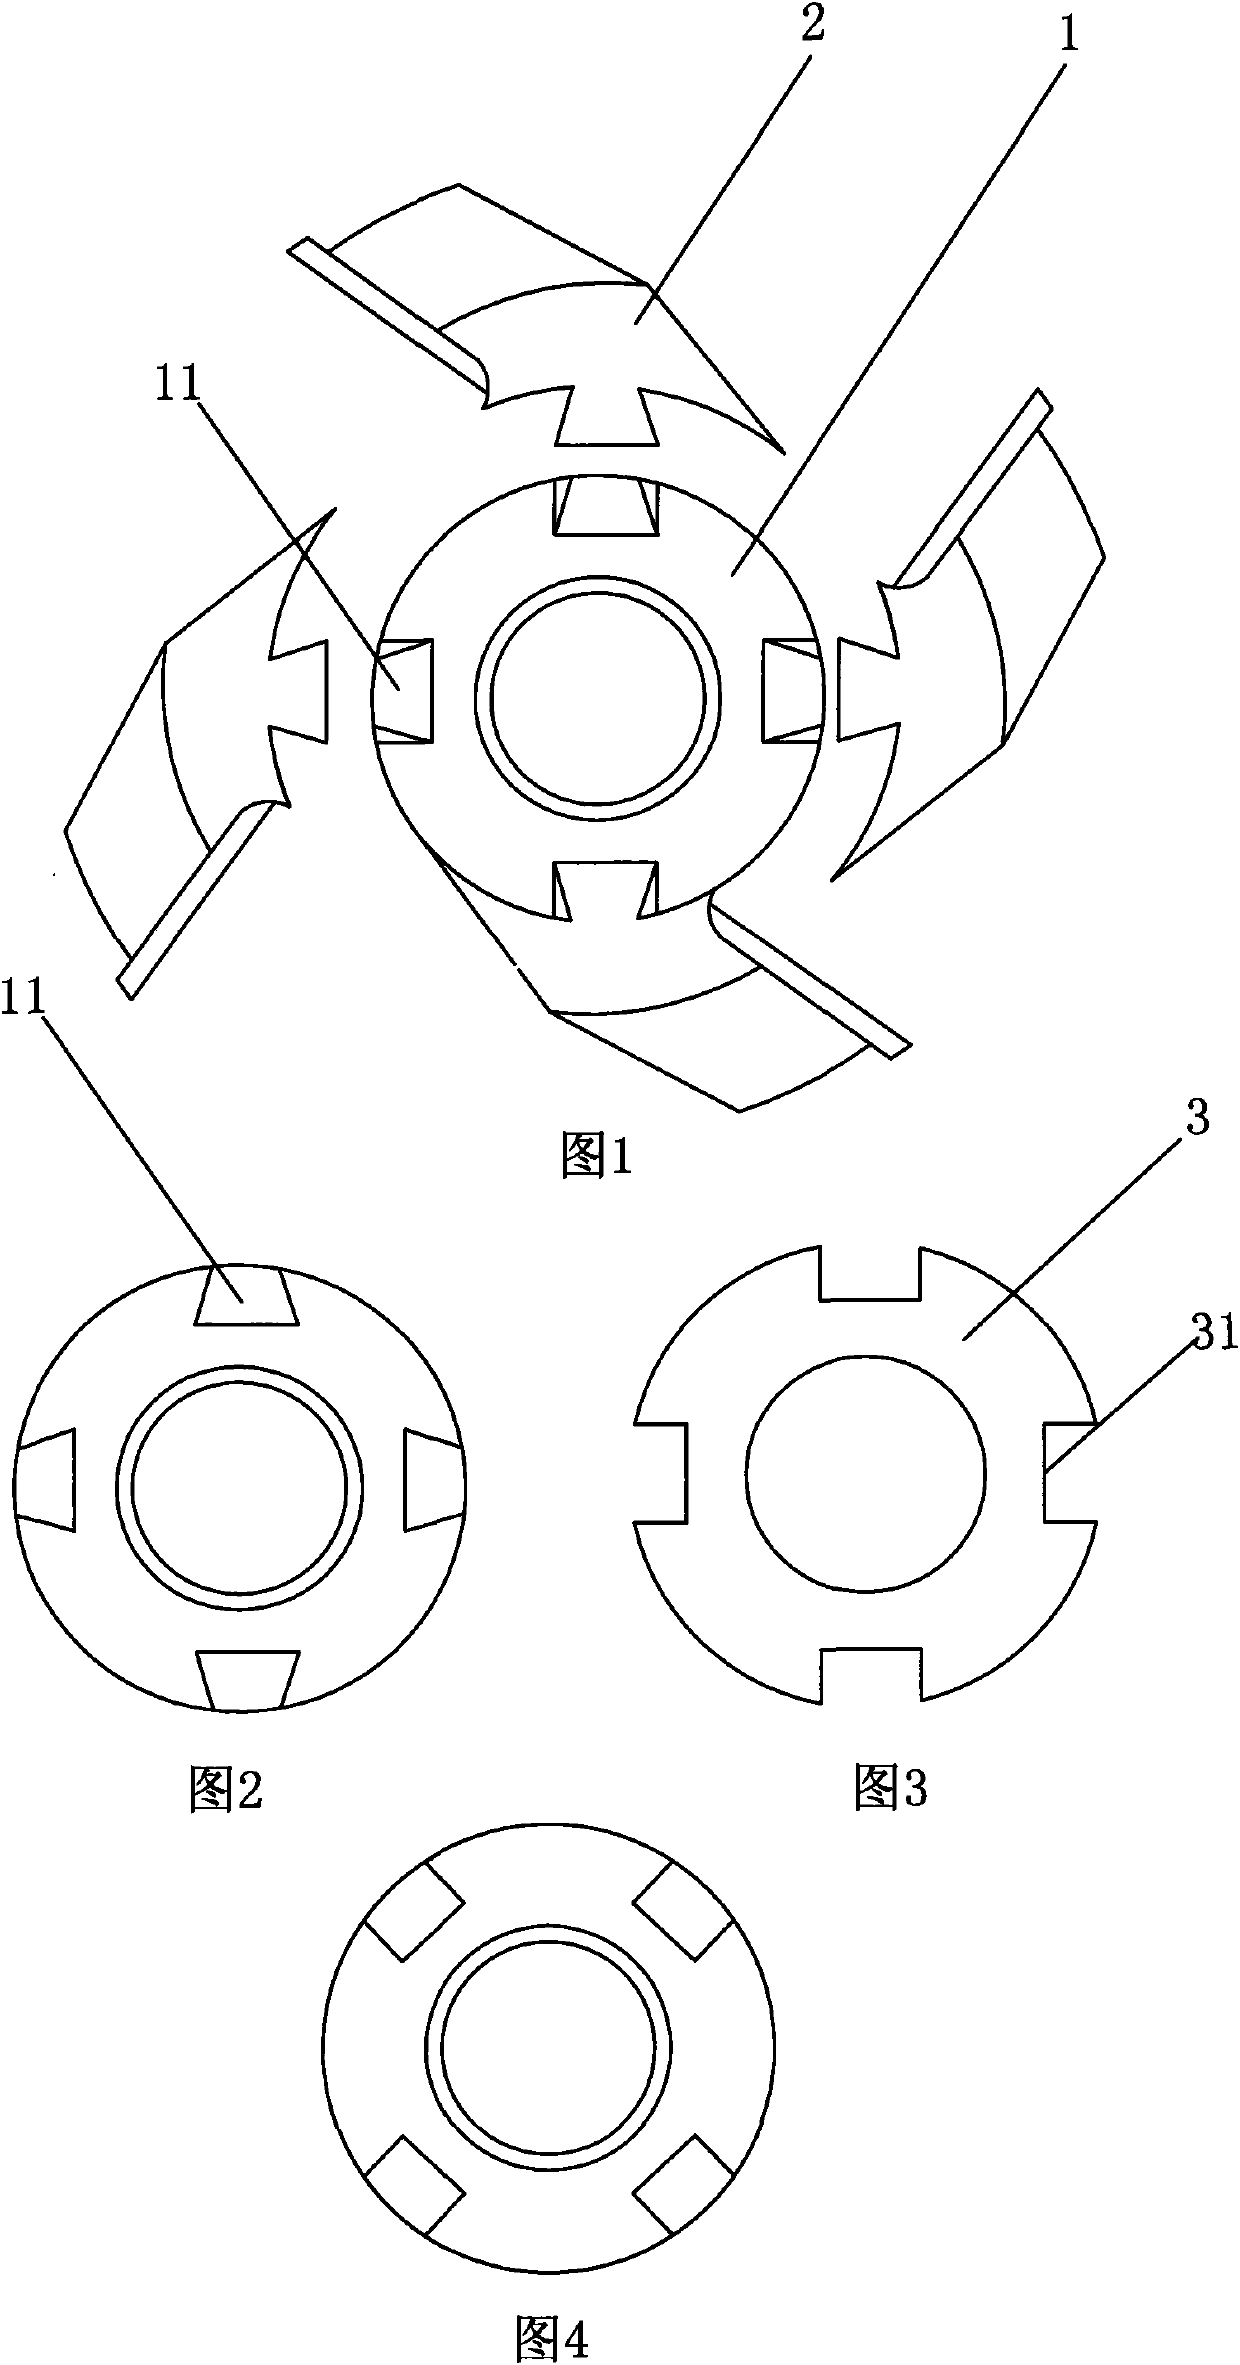 Improved structure of combined type plane cutter